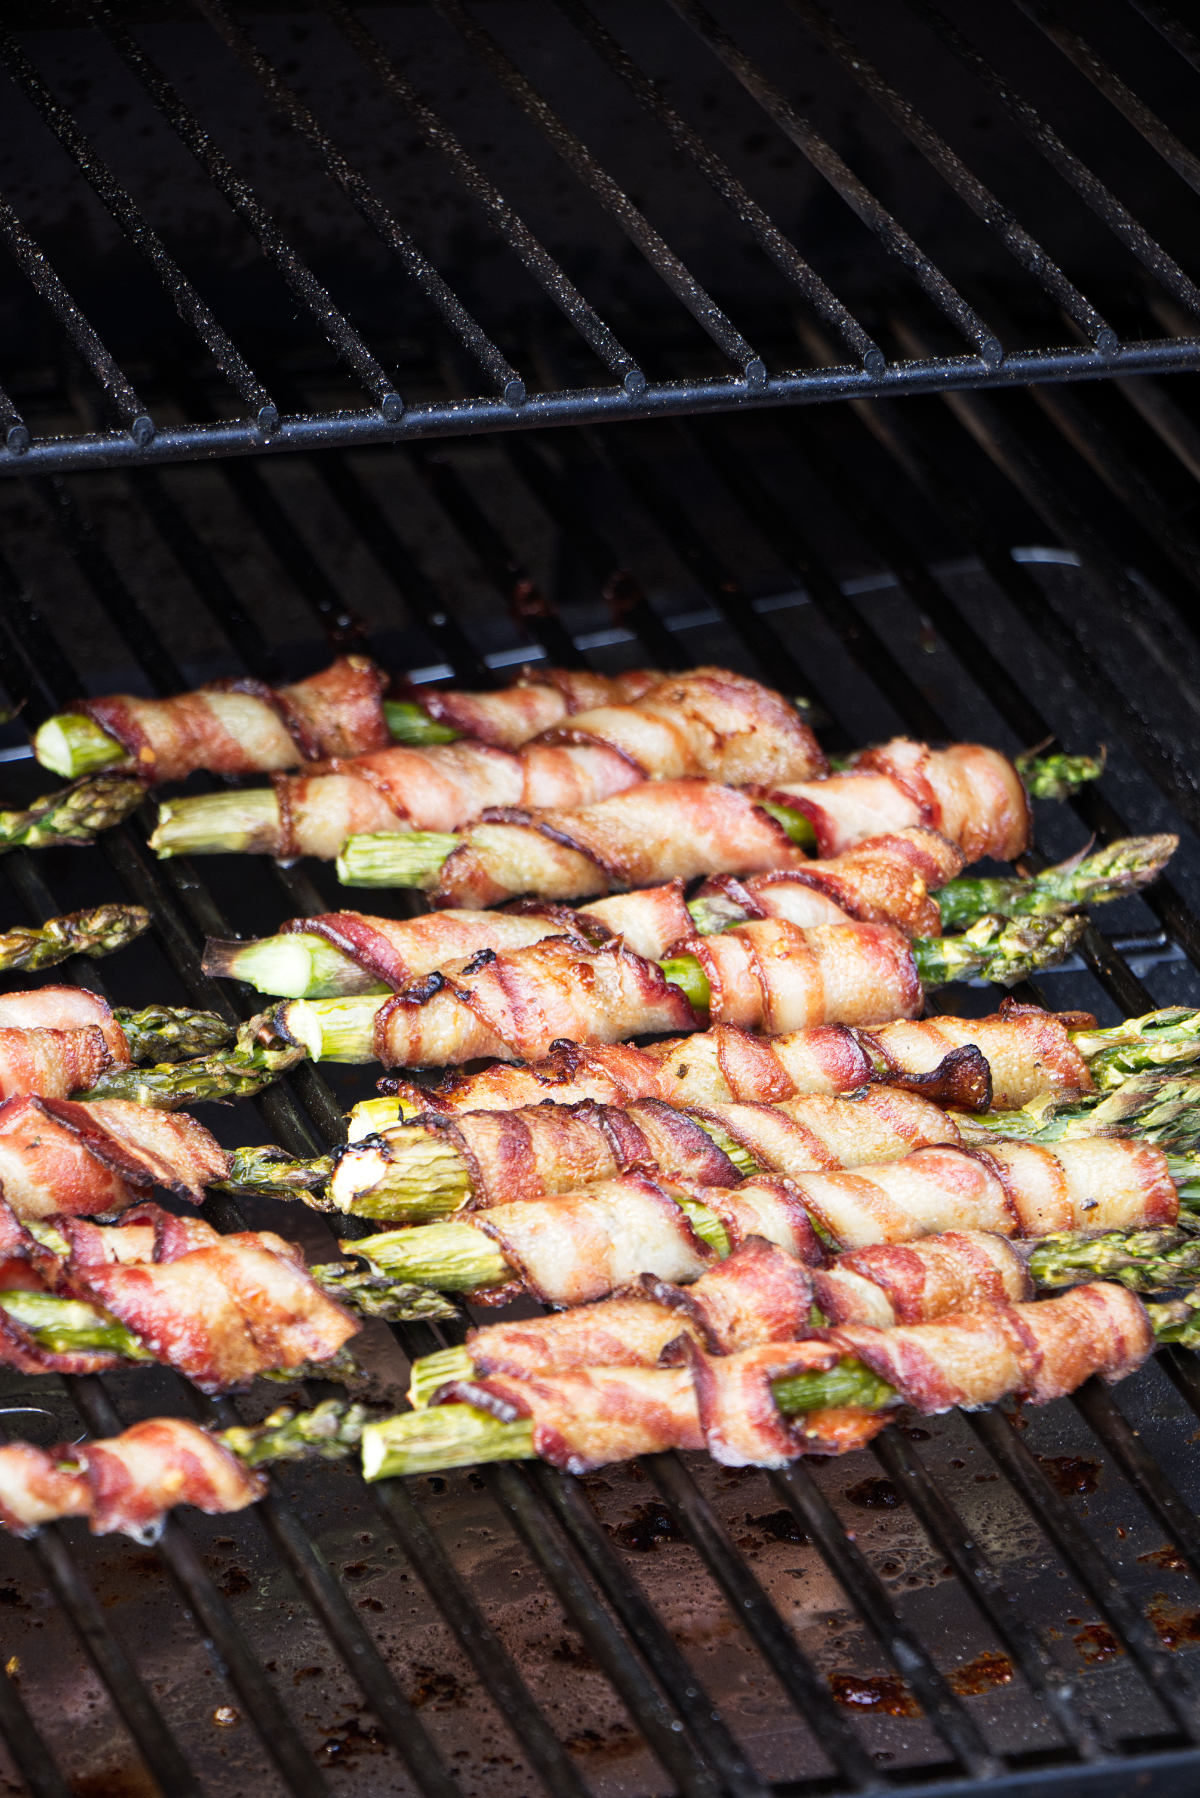 Smoking bacon wrapped asparagus on the grill.